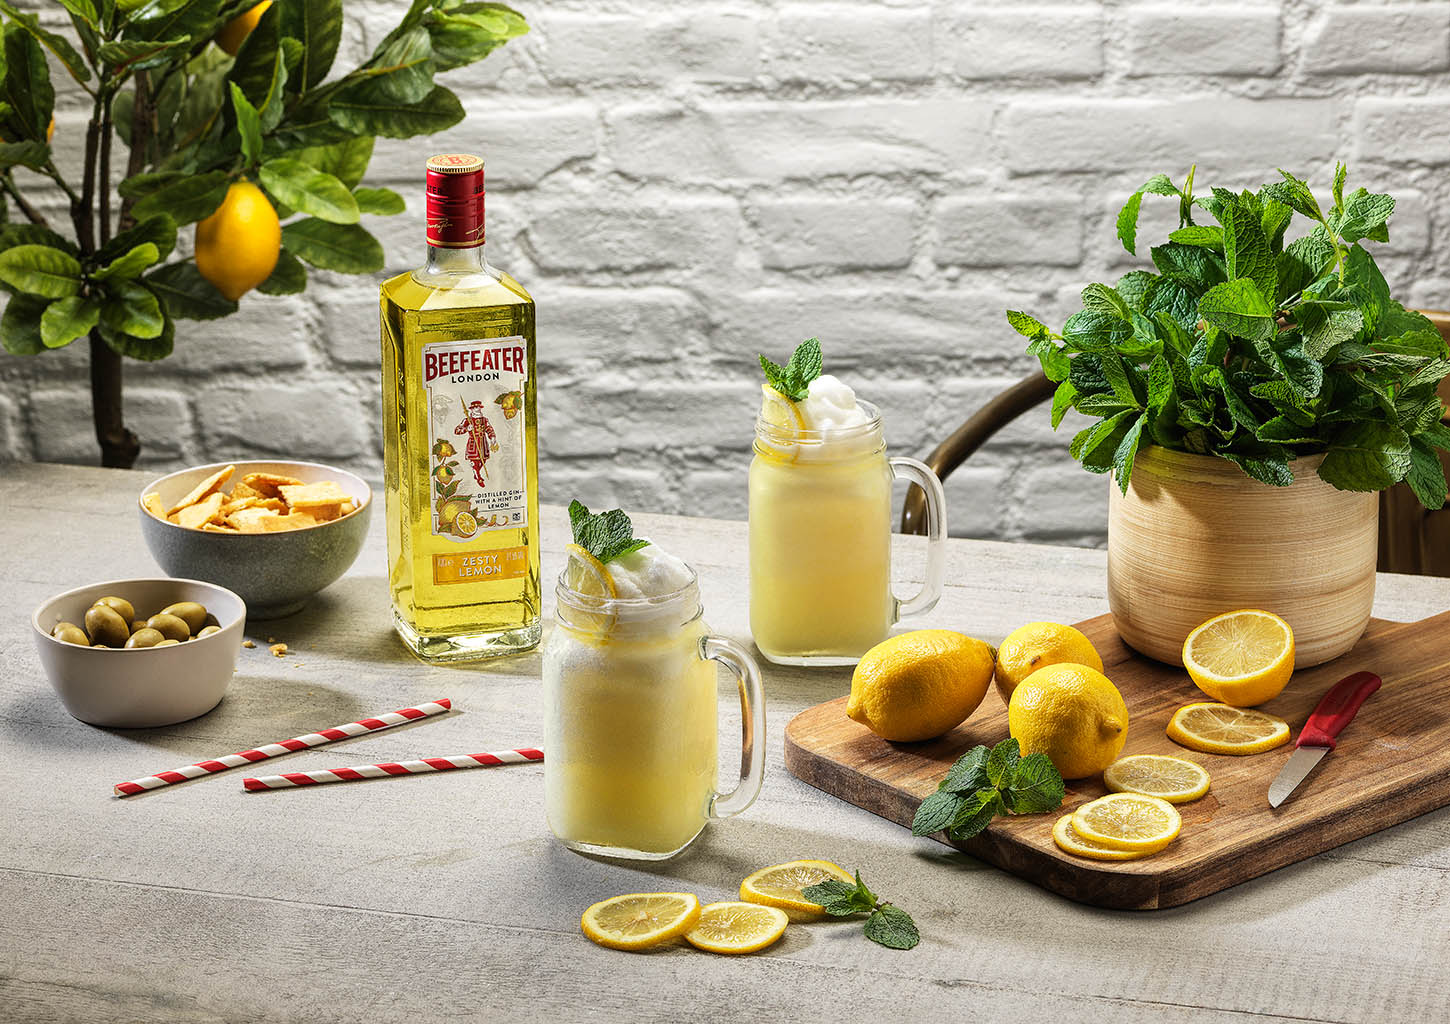 Drinks Photography of Beefeater Zesty Lemon gin bottle and serve by Packshot Factory